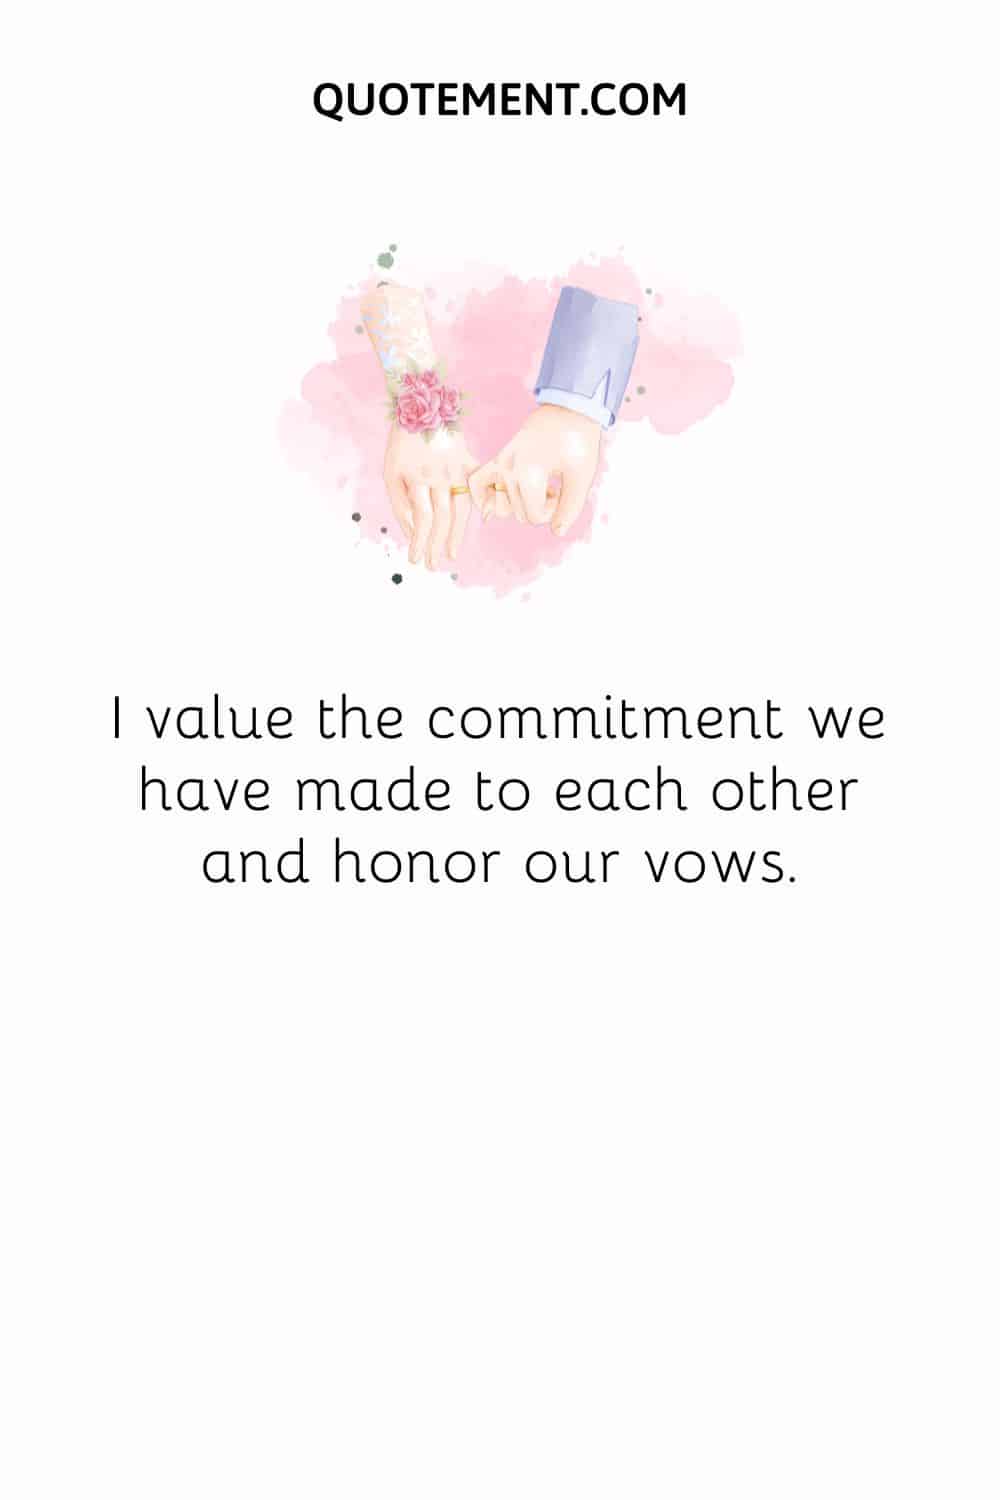 I value the commitment we have made to each other and honor our vows